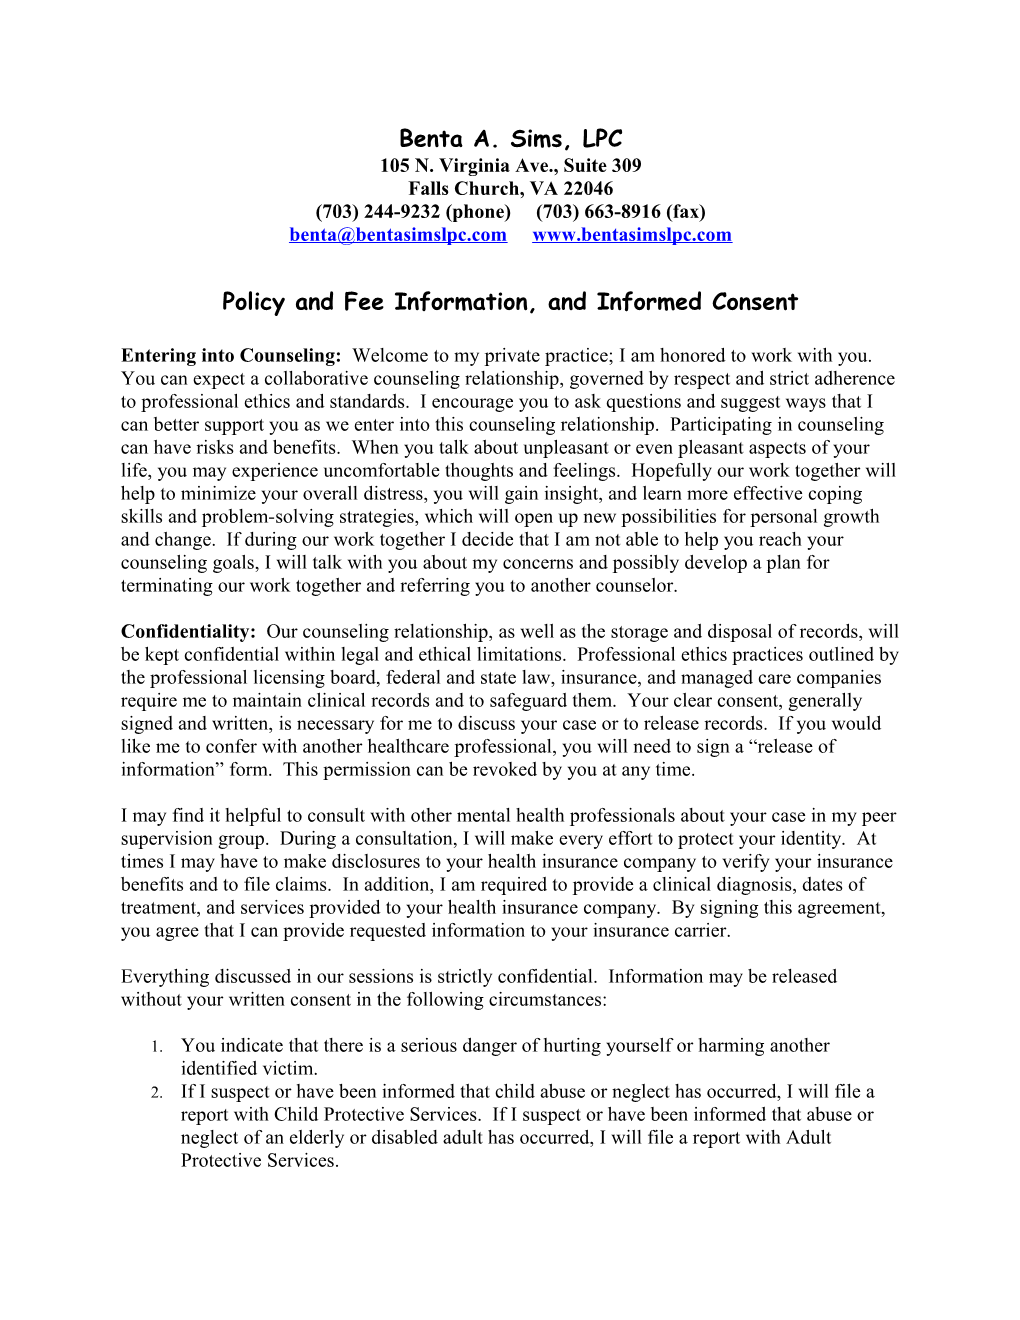 Policy and Fee Information, and Informed Consent